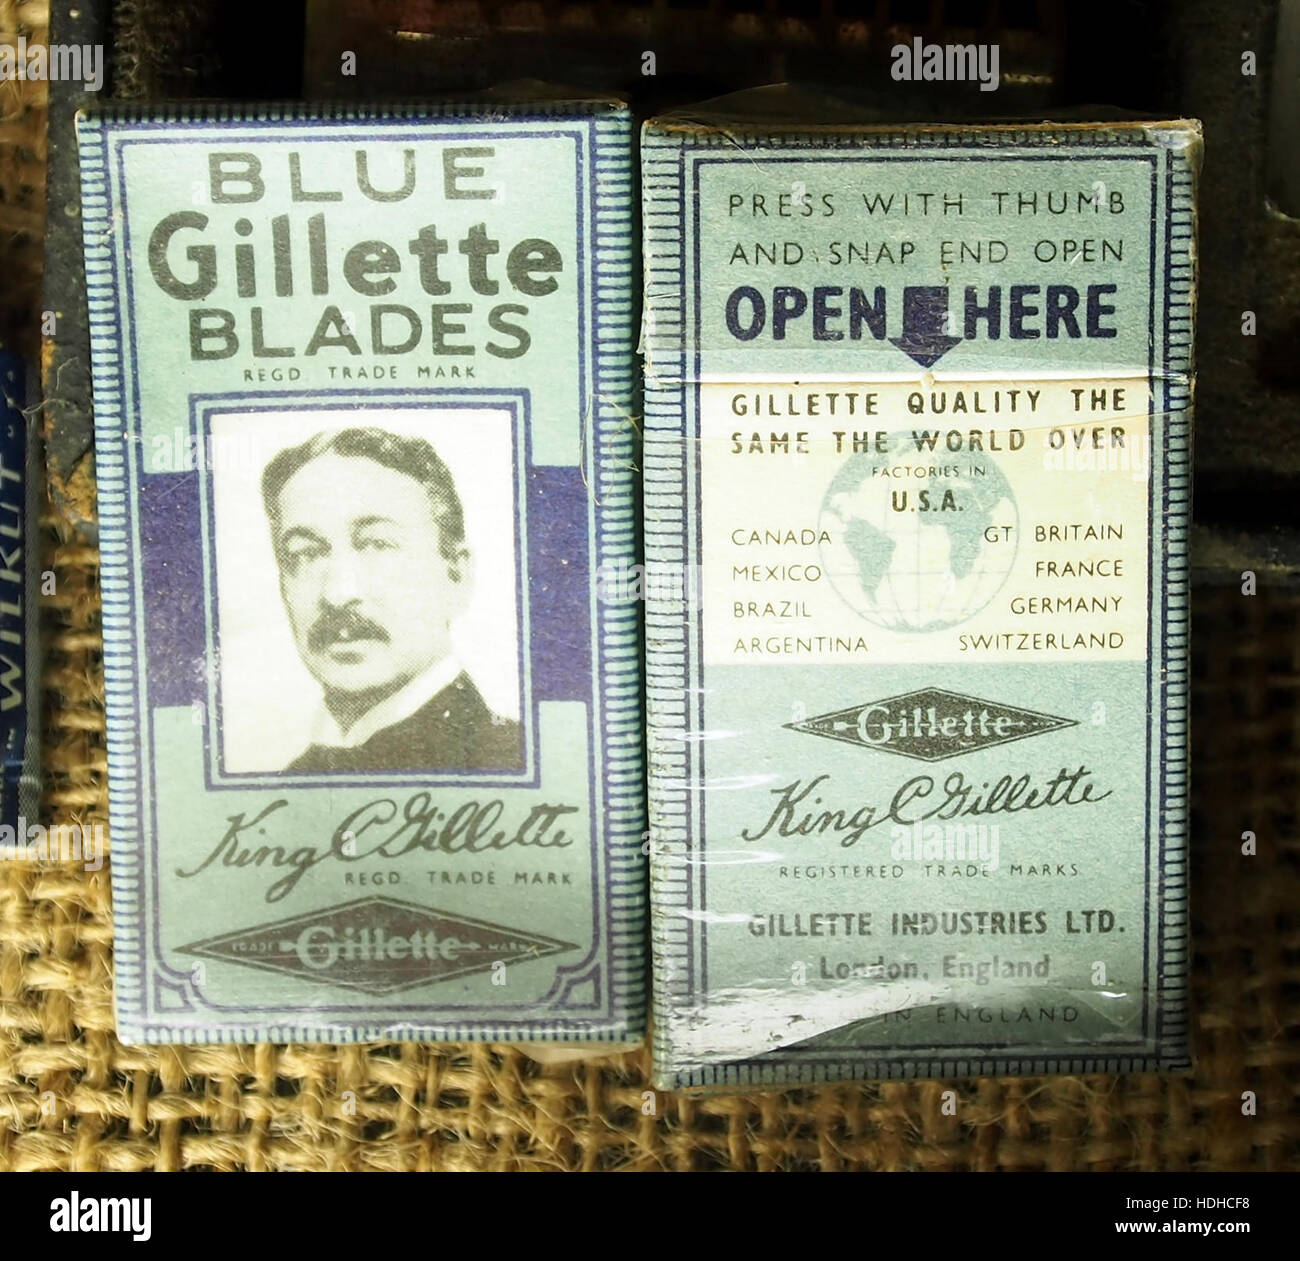 Blue Gillette blades, Museum Winter 1944 in Gingelom Stock Photo